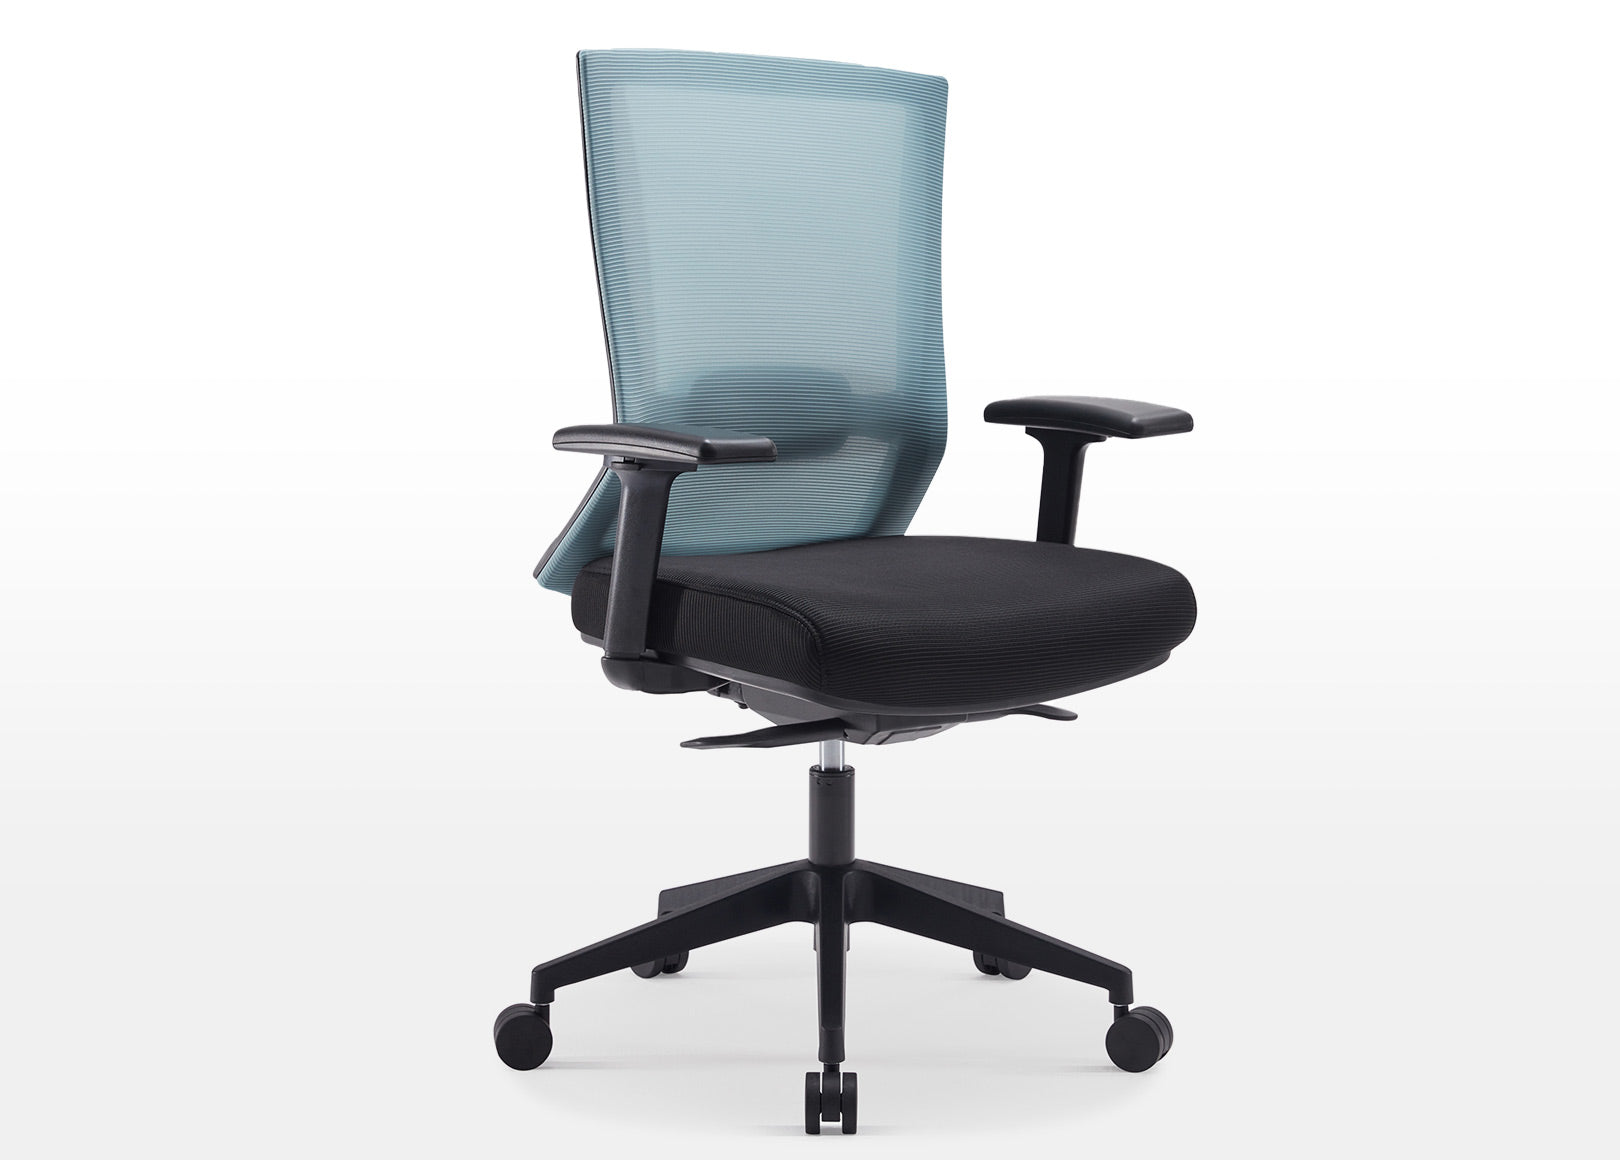 Cyan Elite67 Ergonomic Mesh Chair with Lumbar Support, Adjustable Seat Depth & Height, Armrests - Personalized Comfort and Support for Office or Home